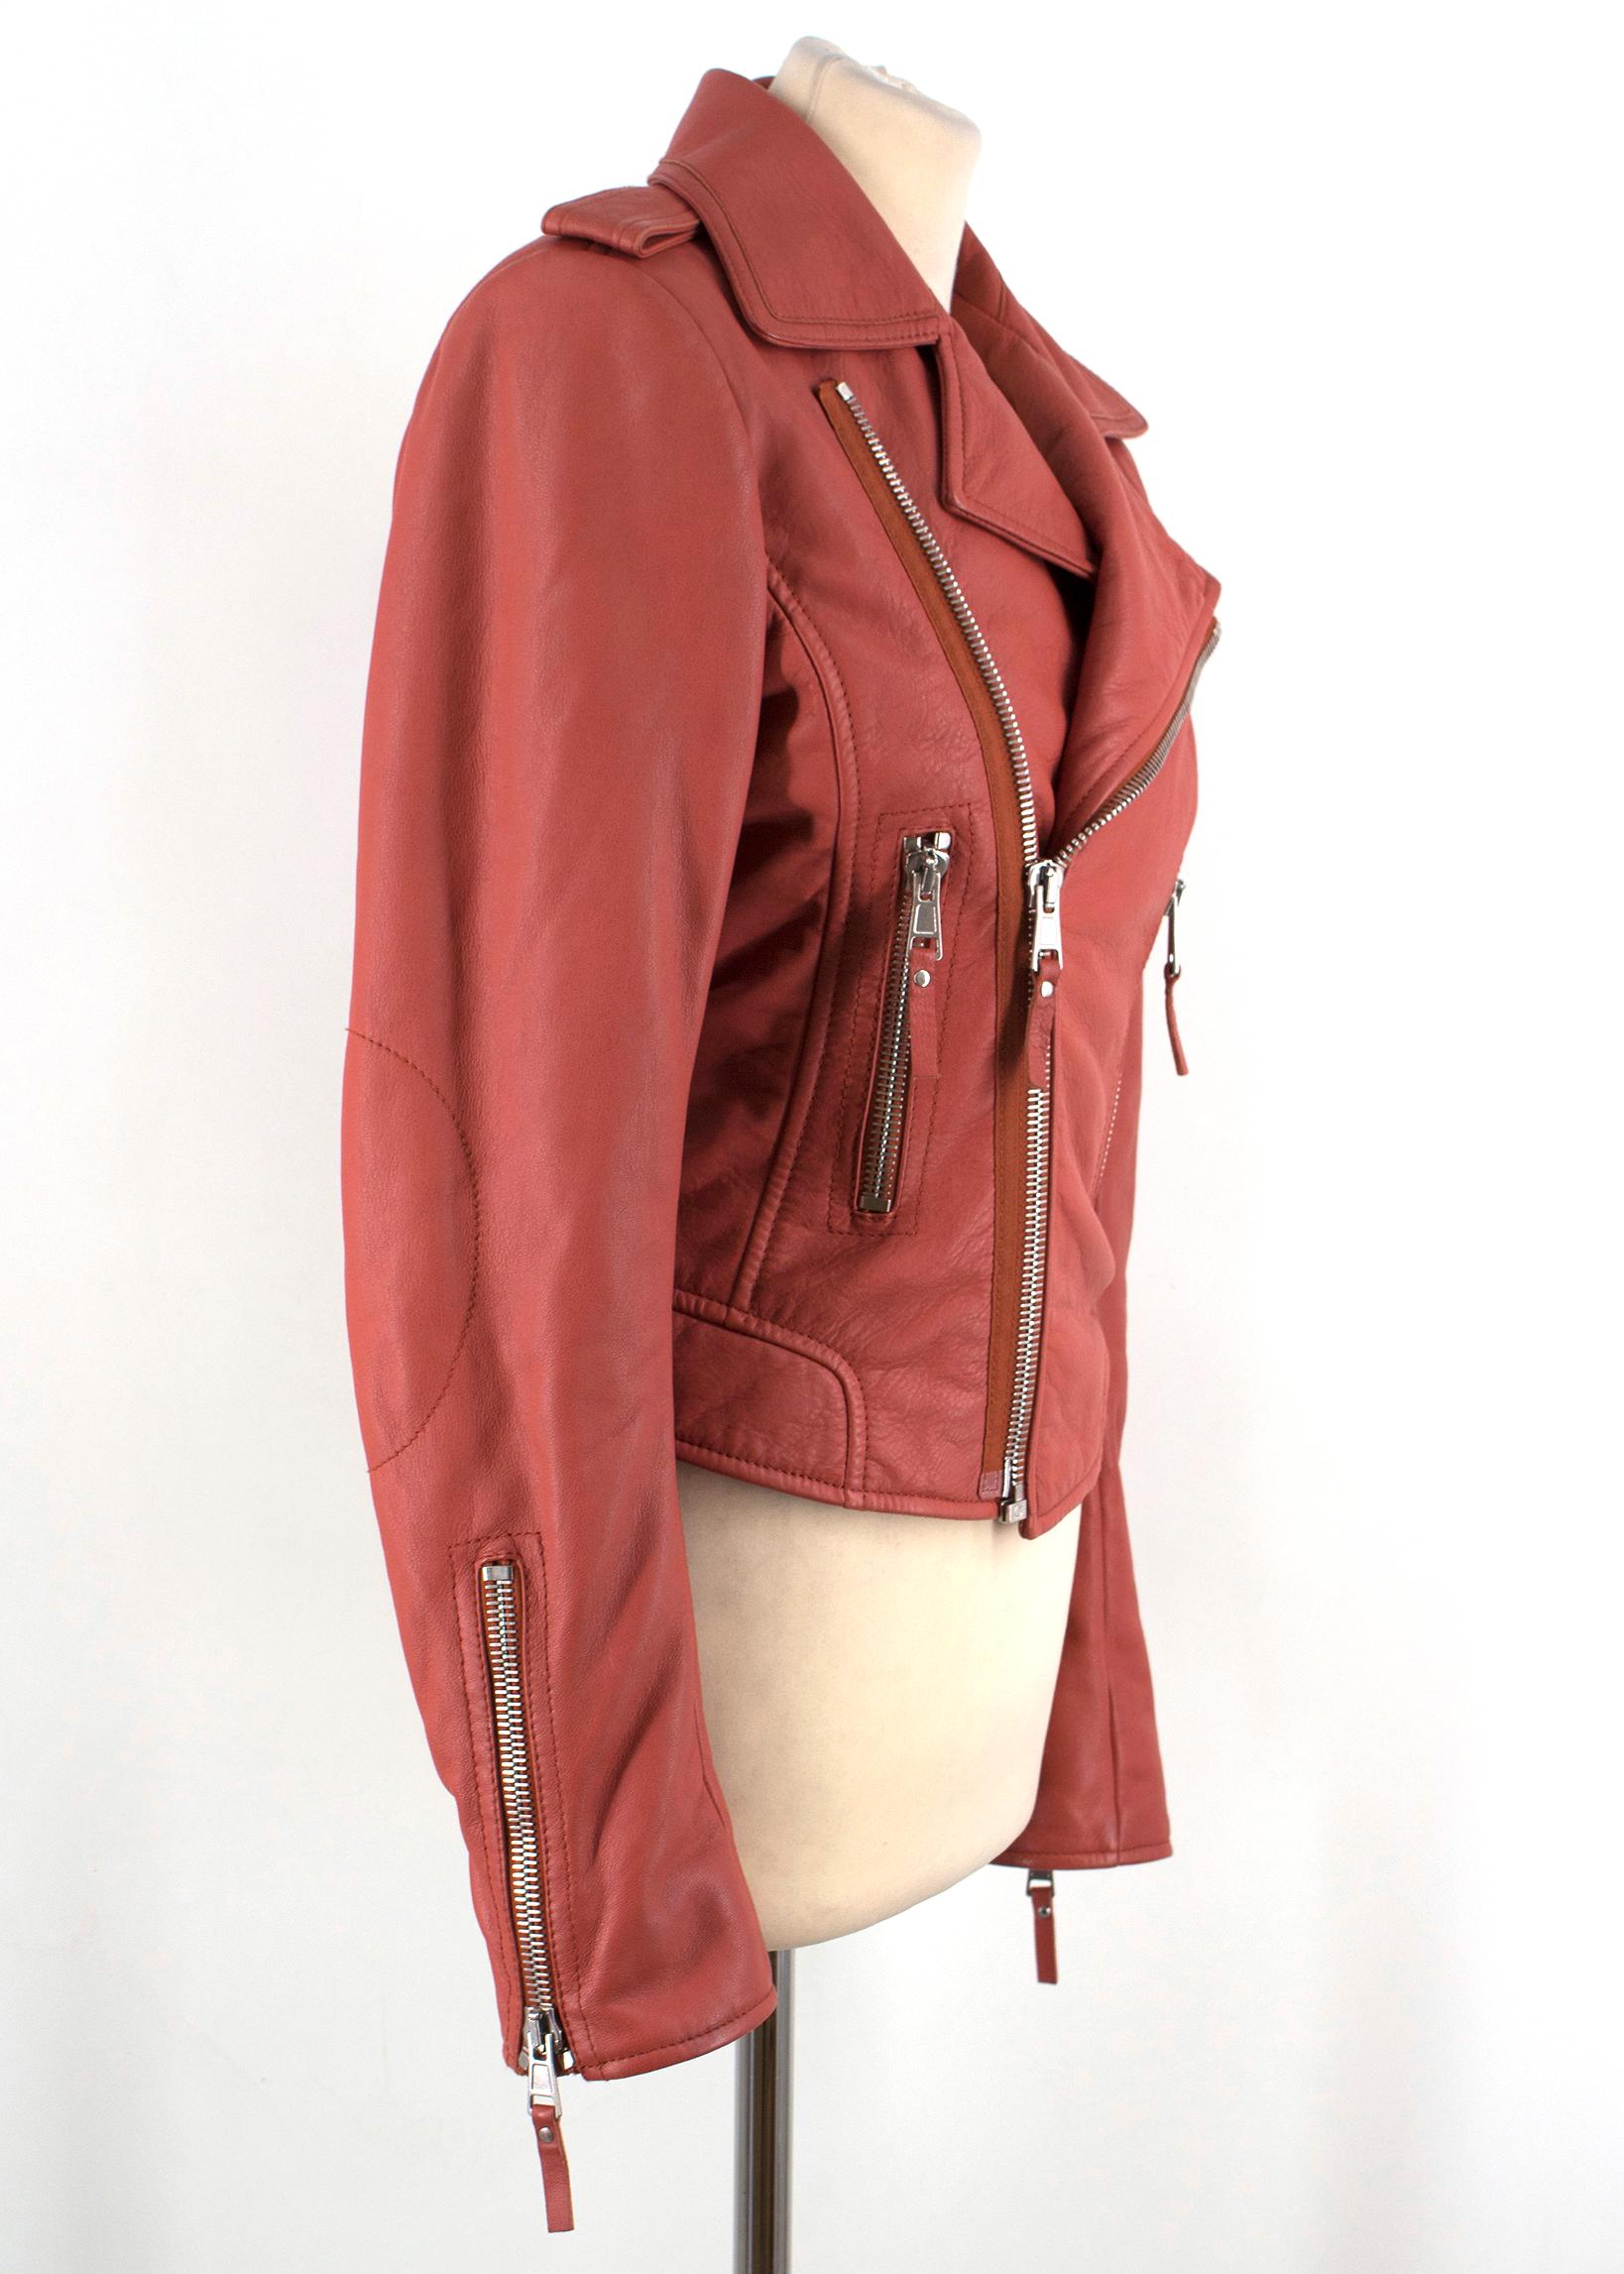 Balenciaga Red Leather Jacket

- Red lambs leather jacket with silver tone hardware
-Epaulettes with silver tone hardware
-Silver tone zips on cuffs
-Black lining

Sizing:
US 4
XS
Italian 40
Approx.
Length - 56cm
Shoulder width - 40cm
Sleeve length